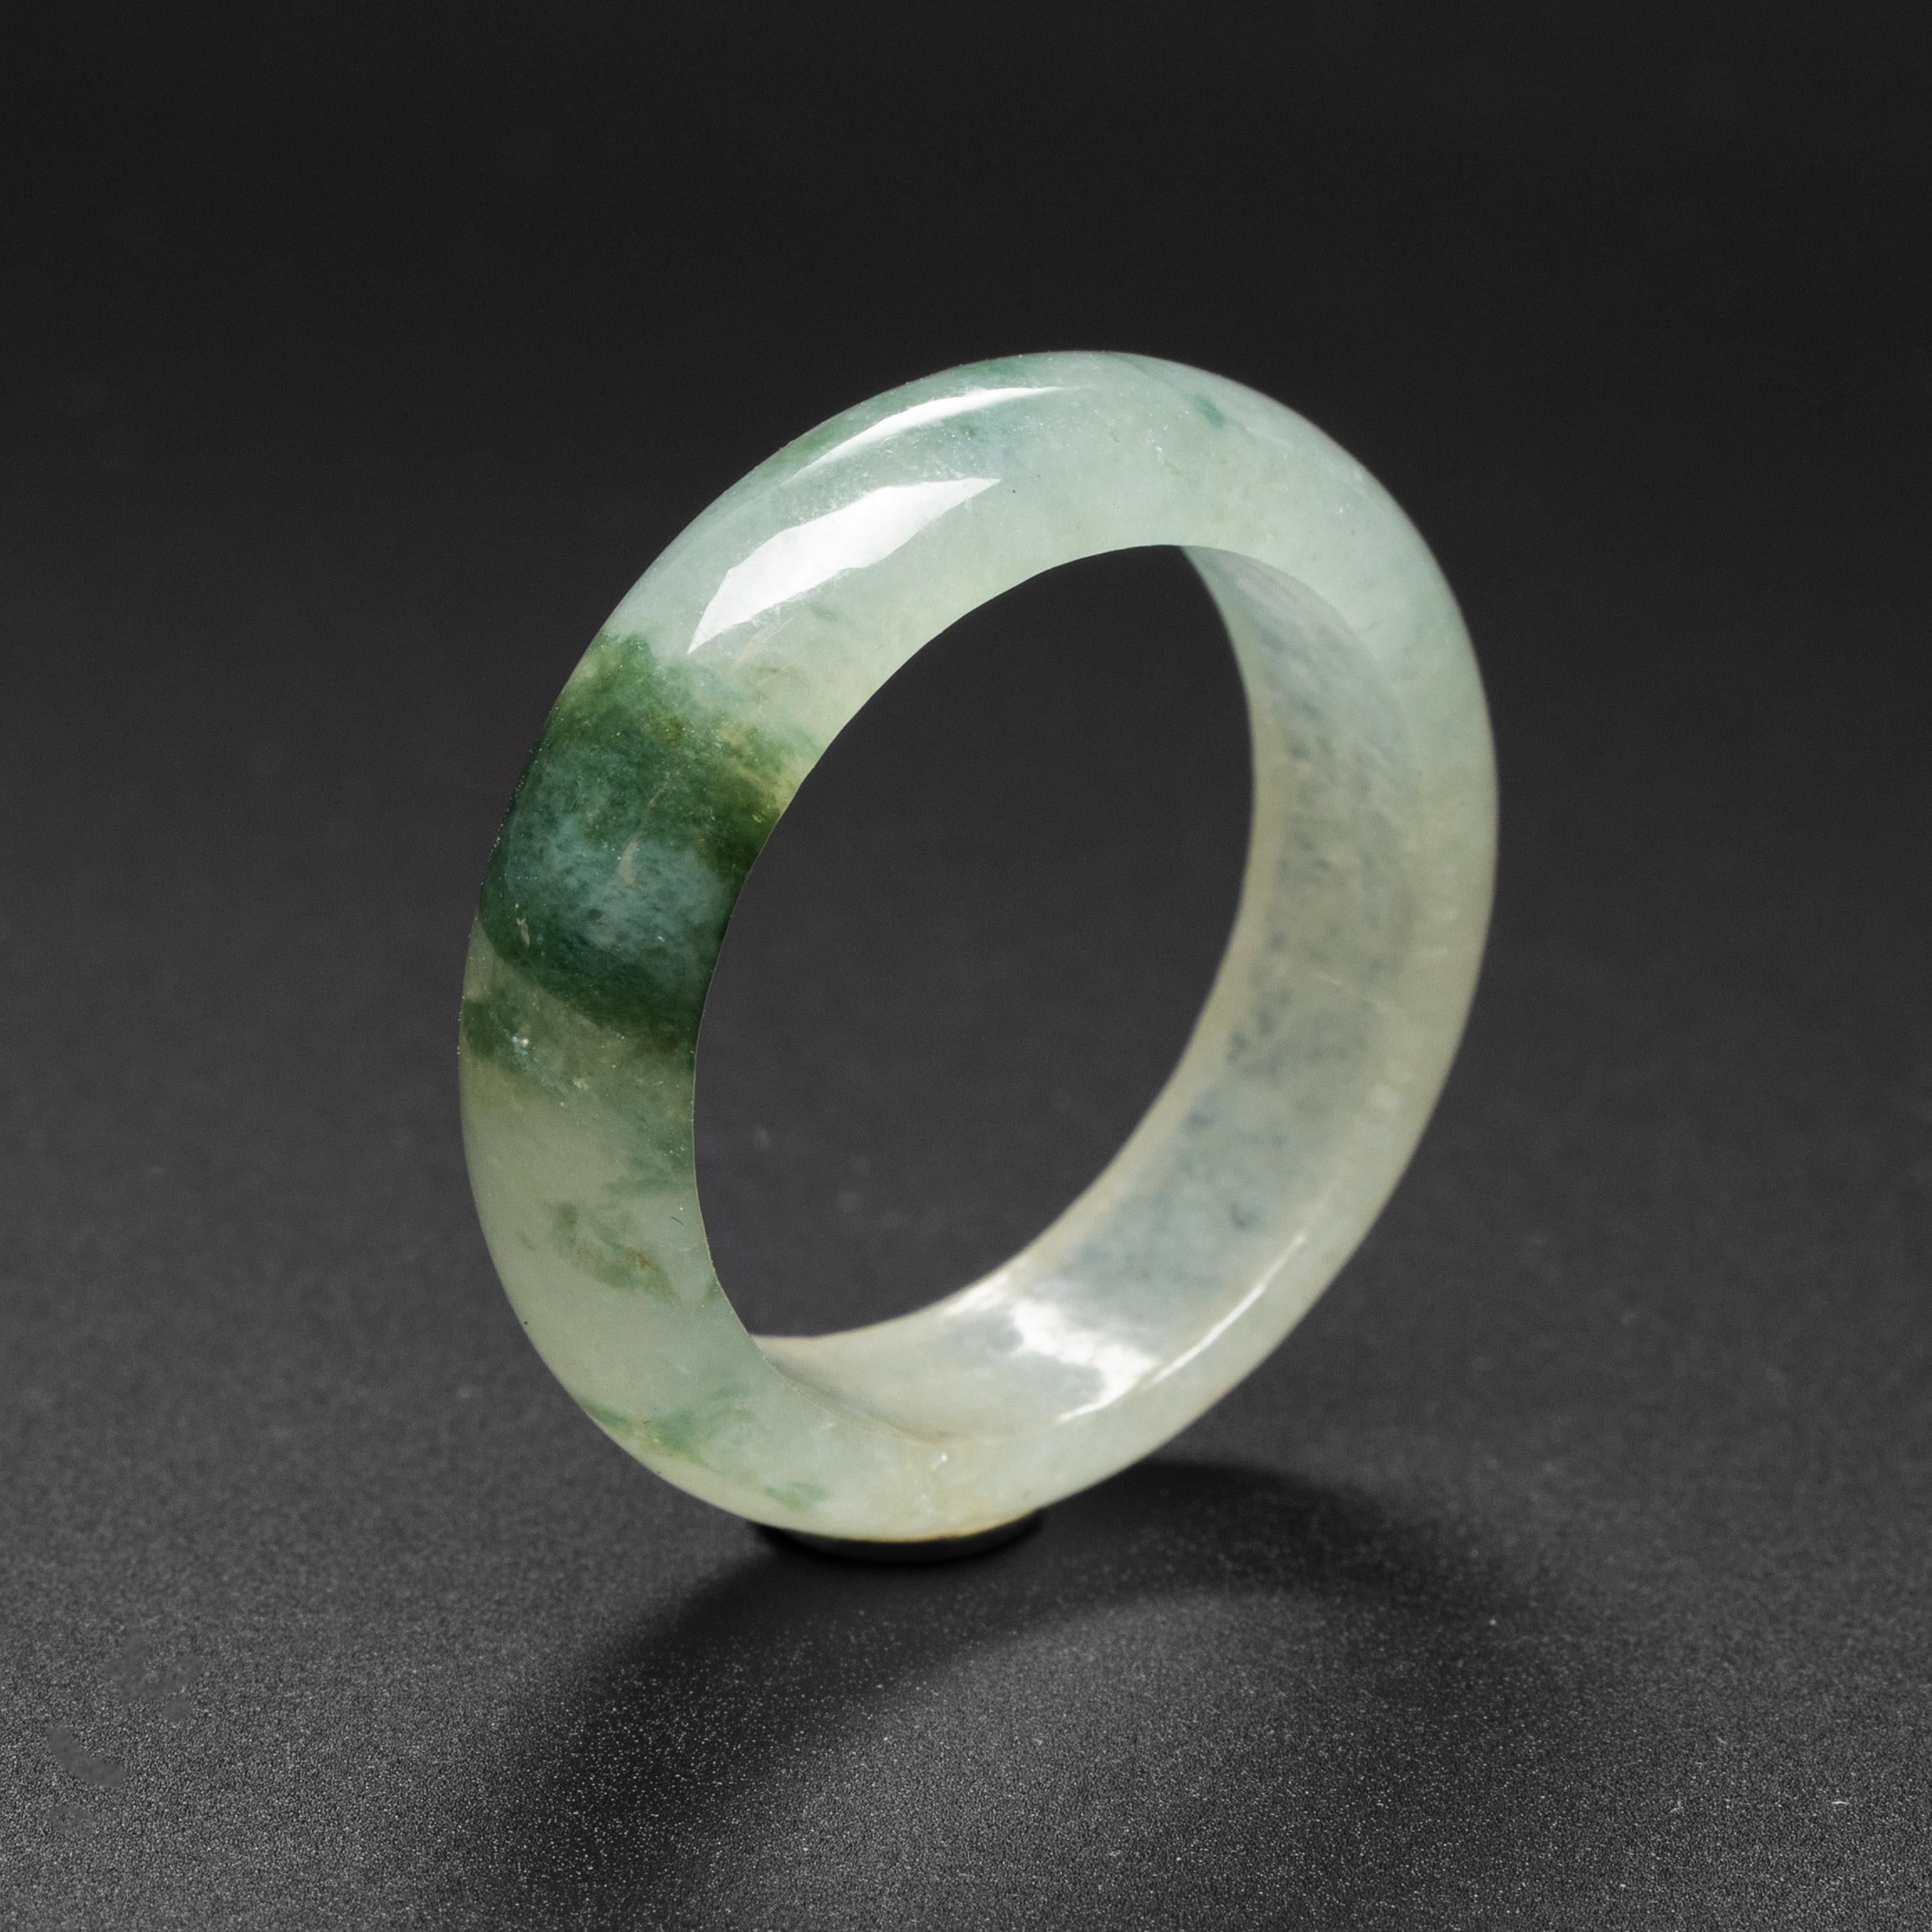 This hand-carved jadeite jade ring is highly translucent and displays a lovely, fibrous grain that makes the stone look like ice; hence this kind of jade is commonly referred to as 